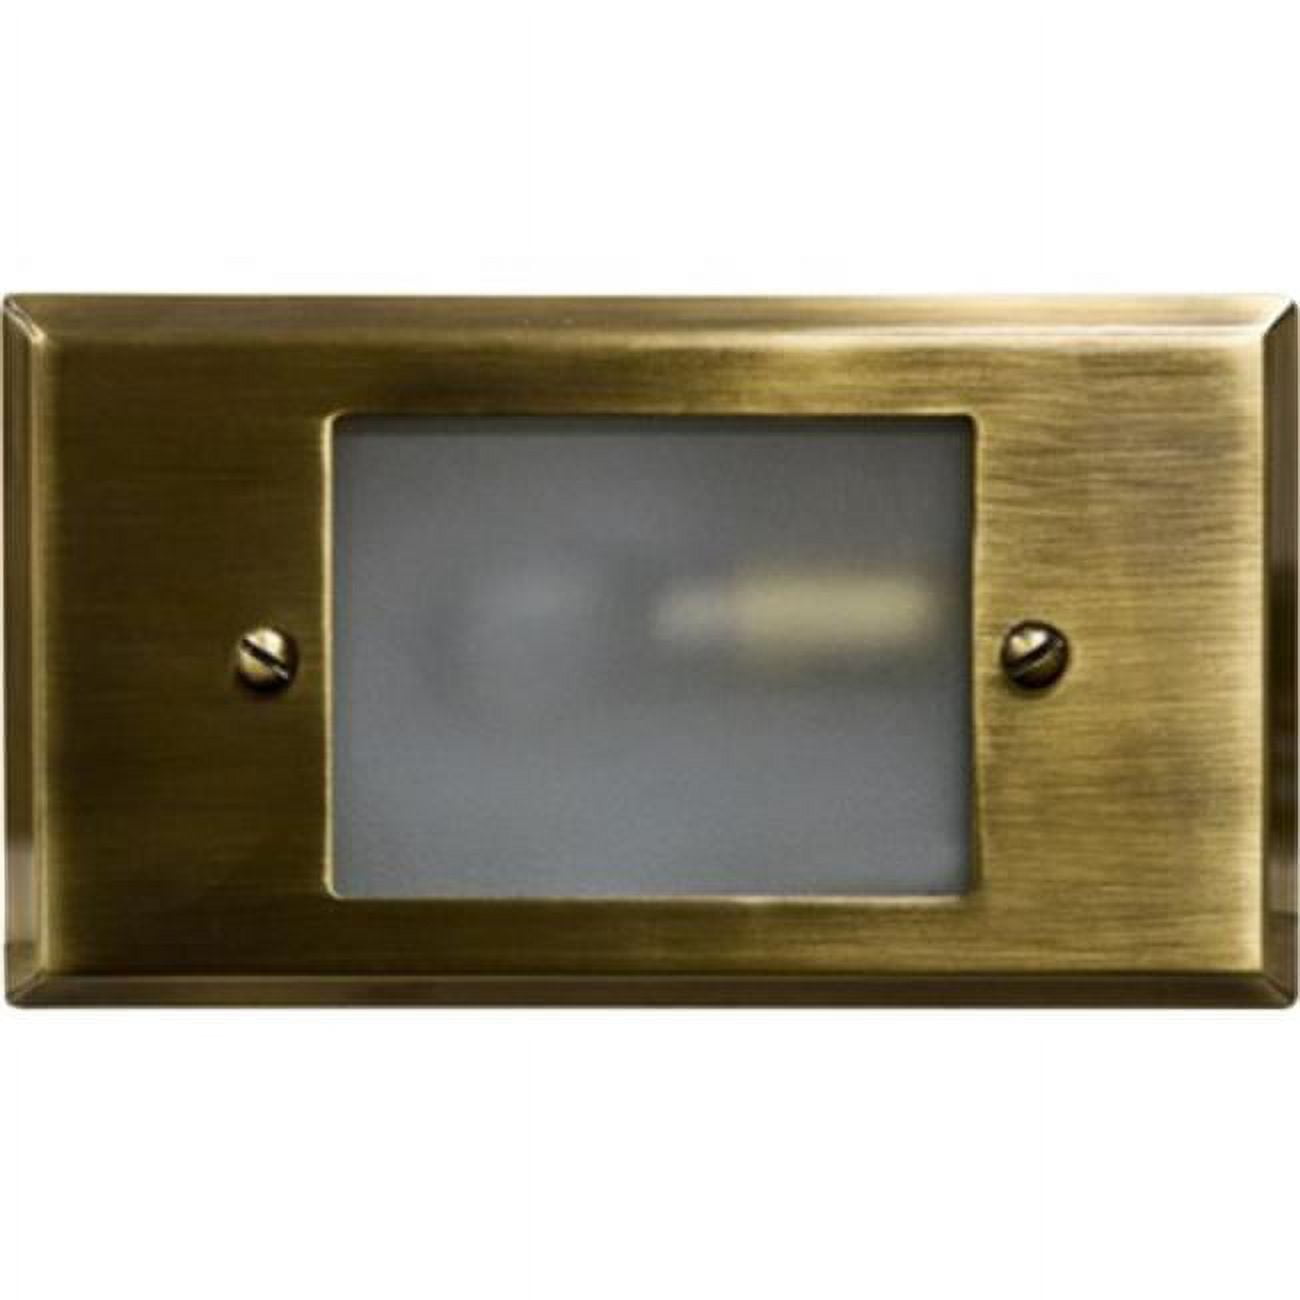 Lv612-abs 12v Open Face Brass Recessed Brick Step Wall Light, 21w - Antique Brass